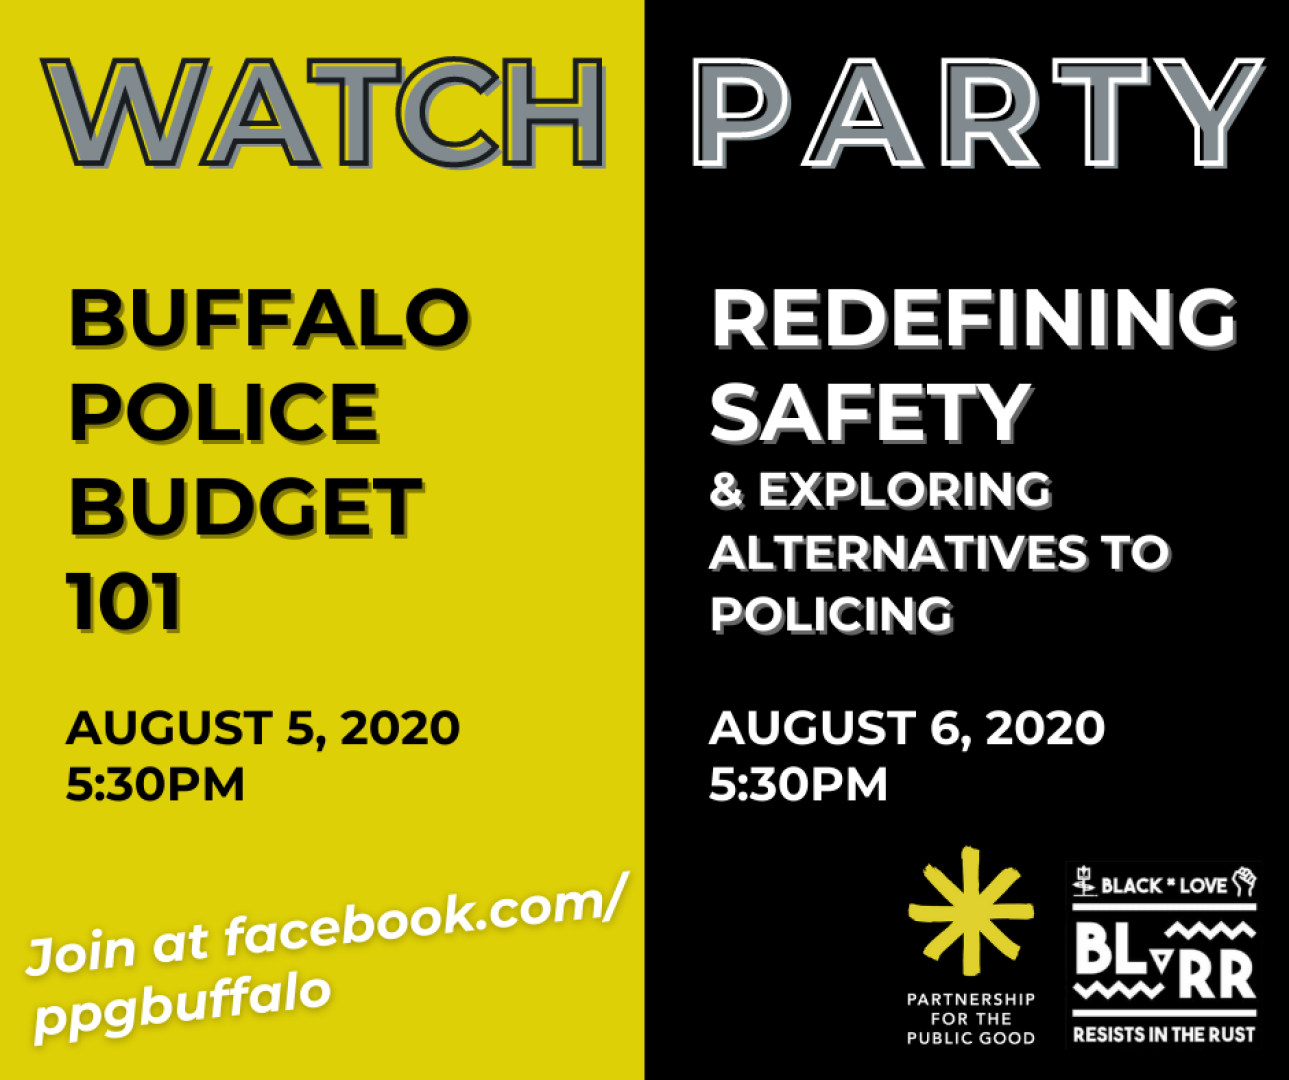 Watch Parties: Buffalo Police Budget 101 & Redefining Safety Workshops